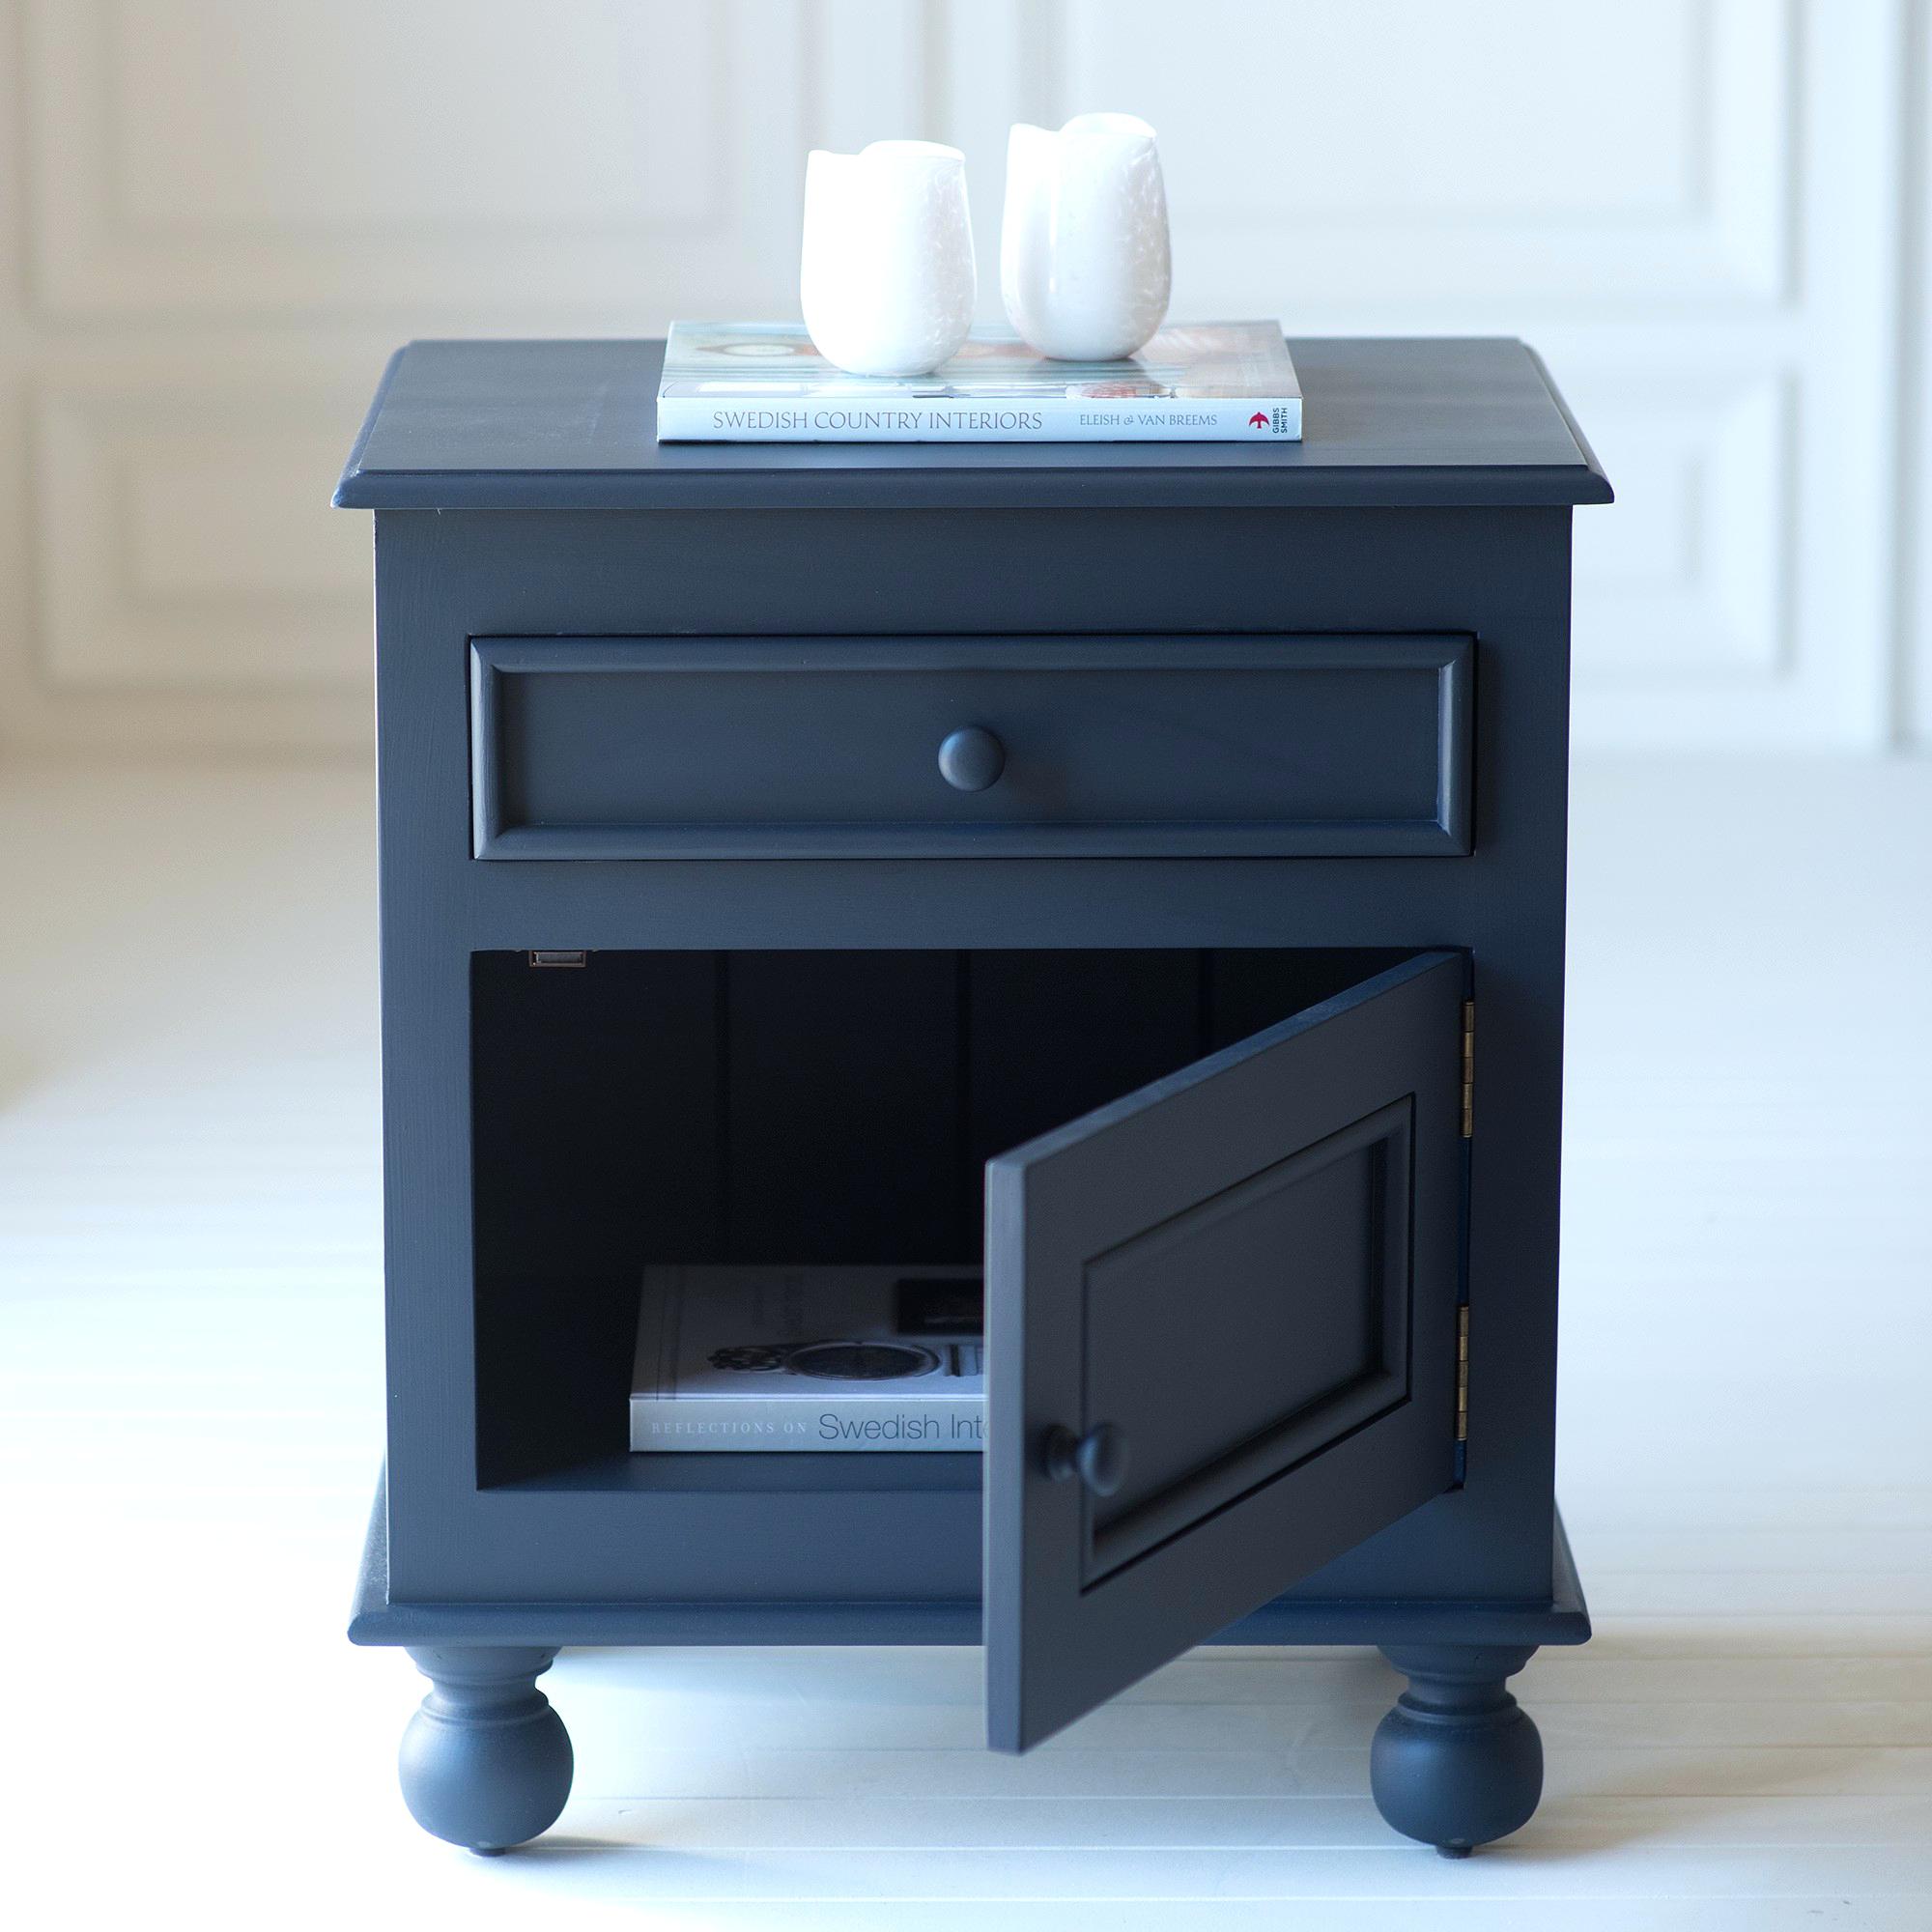 wire accent table the fantastic unbelievable target locker navy nightstand blue lamps template compassion info lacquer modern rustic wood floating shelves pipe dining small cream